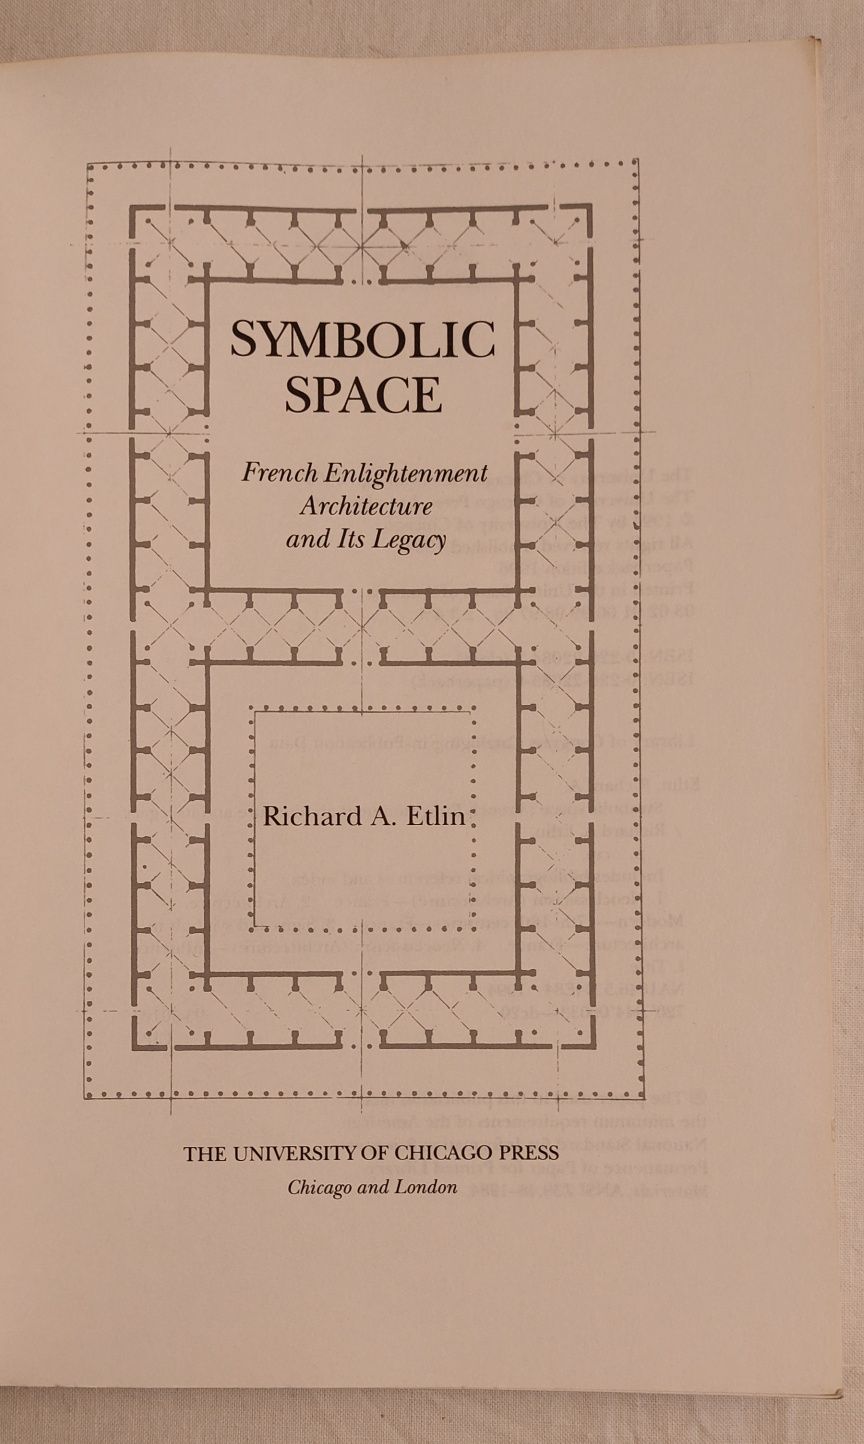 Symbolic Space - French Enlightenment Architecture and Its Legacy